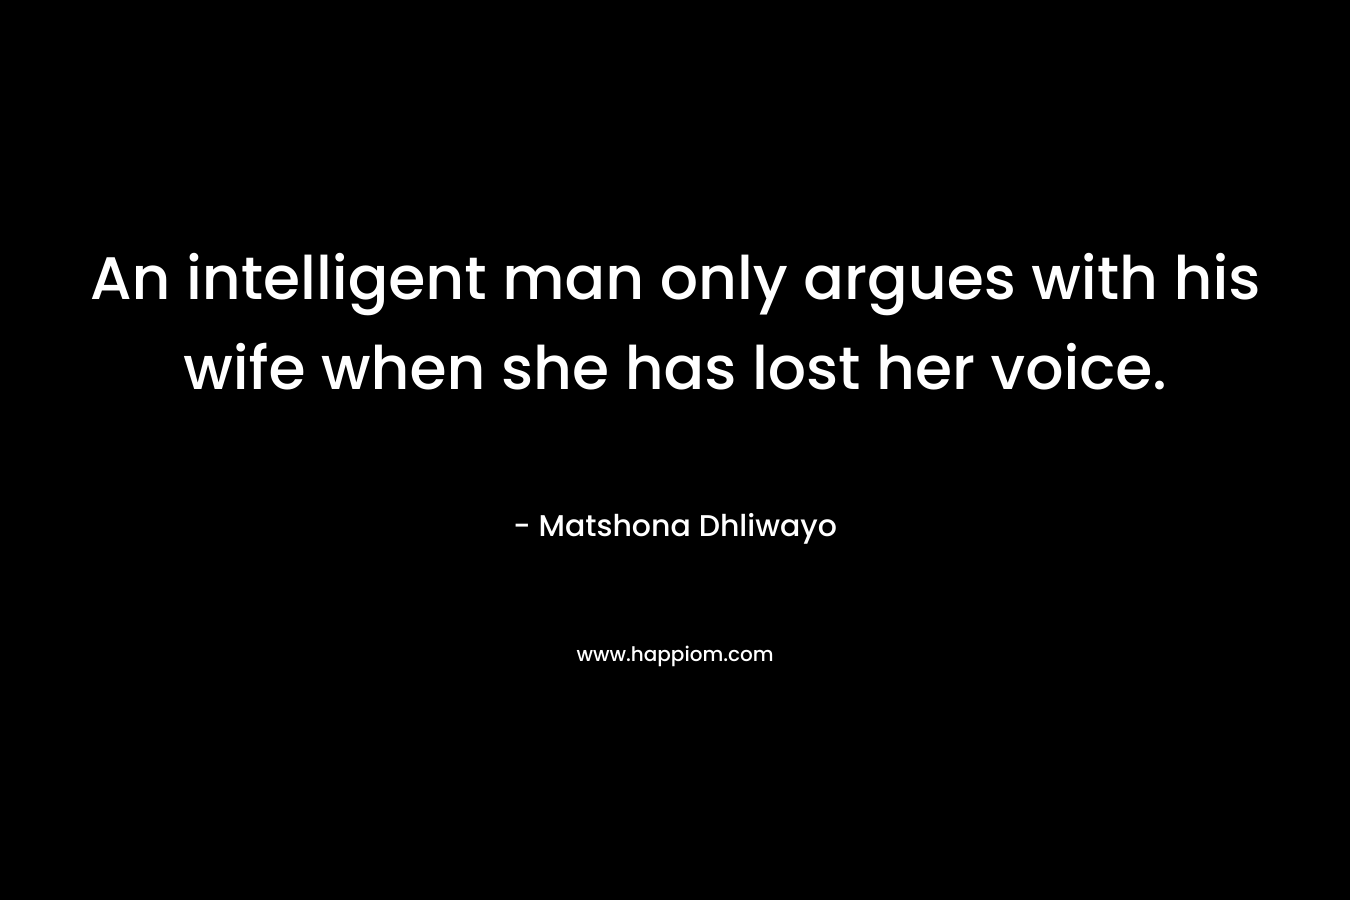 An intelligent man only argues with his wife when she has lost her voice. – Matshona Dhliwayo